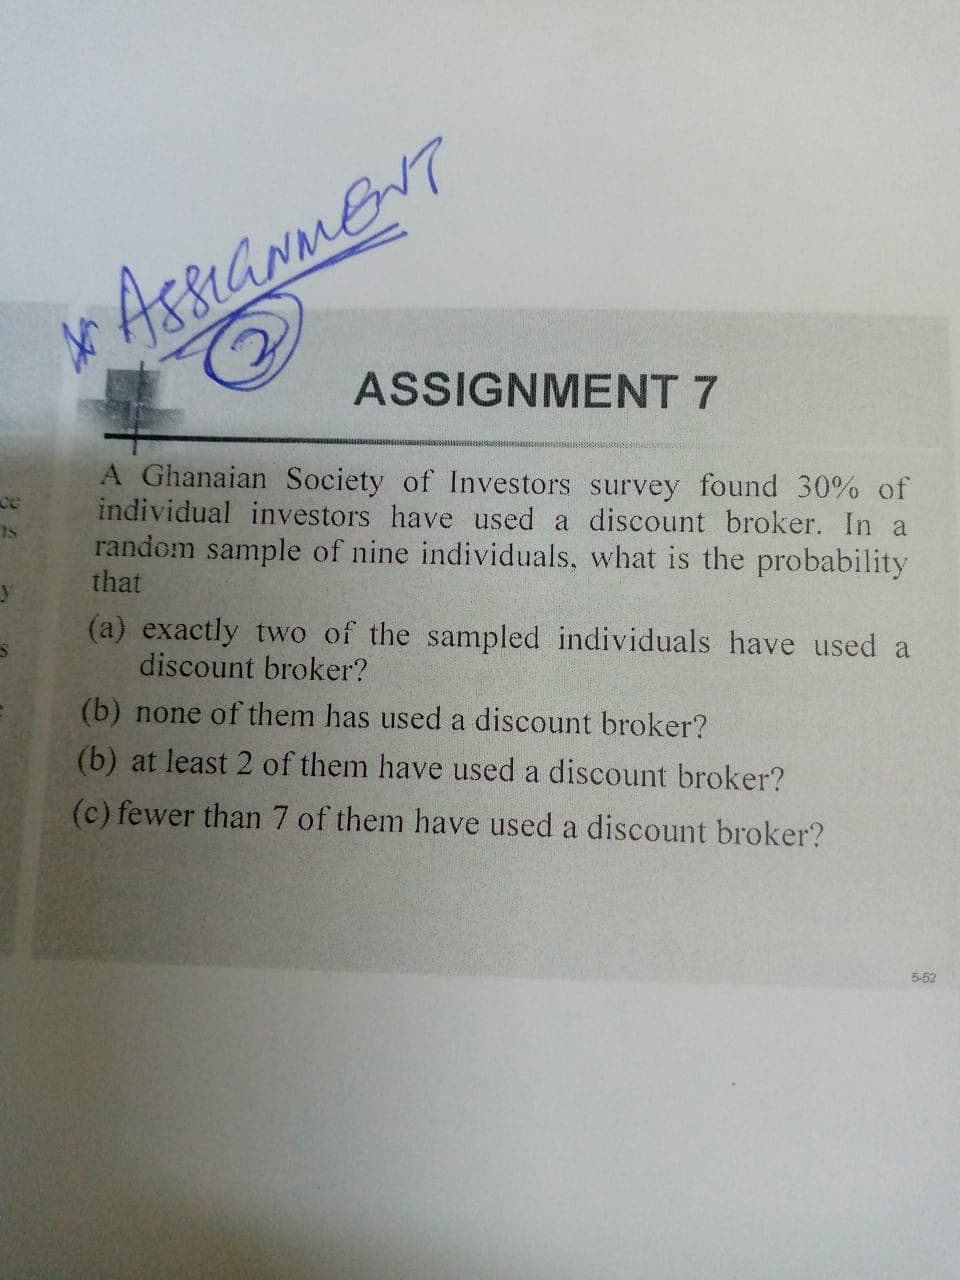 ASSIGNMENT 7
A Ghanaian Society of Investors survey found 30% of
individual investors have used a discount broker. In a
random sample of nine individuals, what is the probability
that
ce
(a) exactly two of the sampled individuals have used a
discount broker?
(b) none of them has used a discount broker?
(b) at least 2 of them have used a discount broker?
(c) fewer than 7 of them have used a discount broker?
5-52
